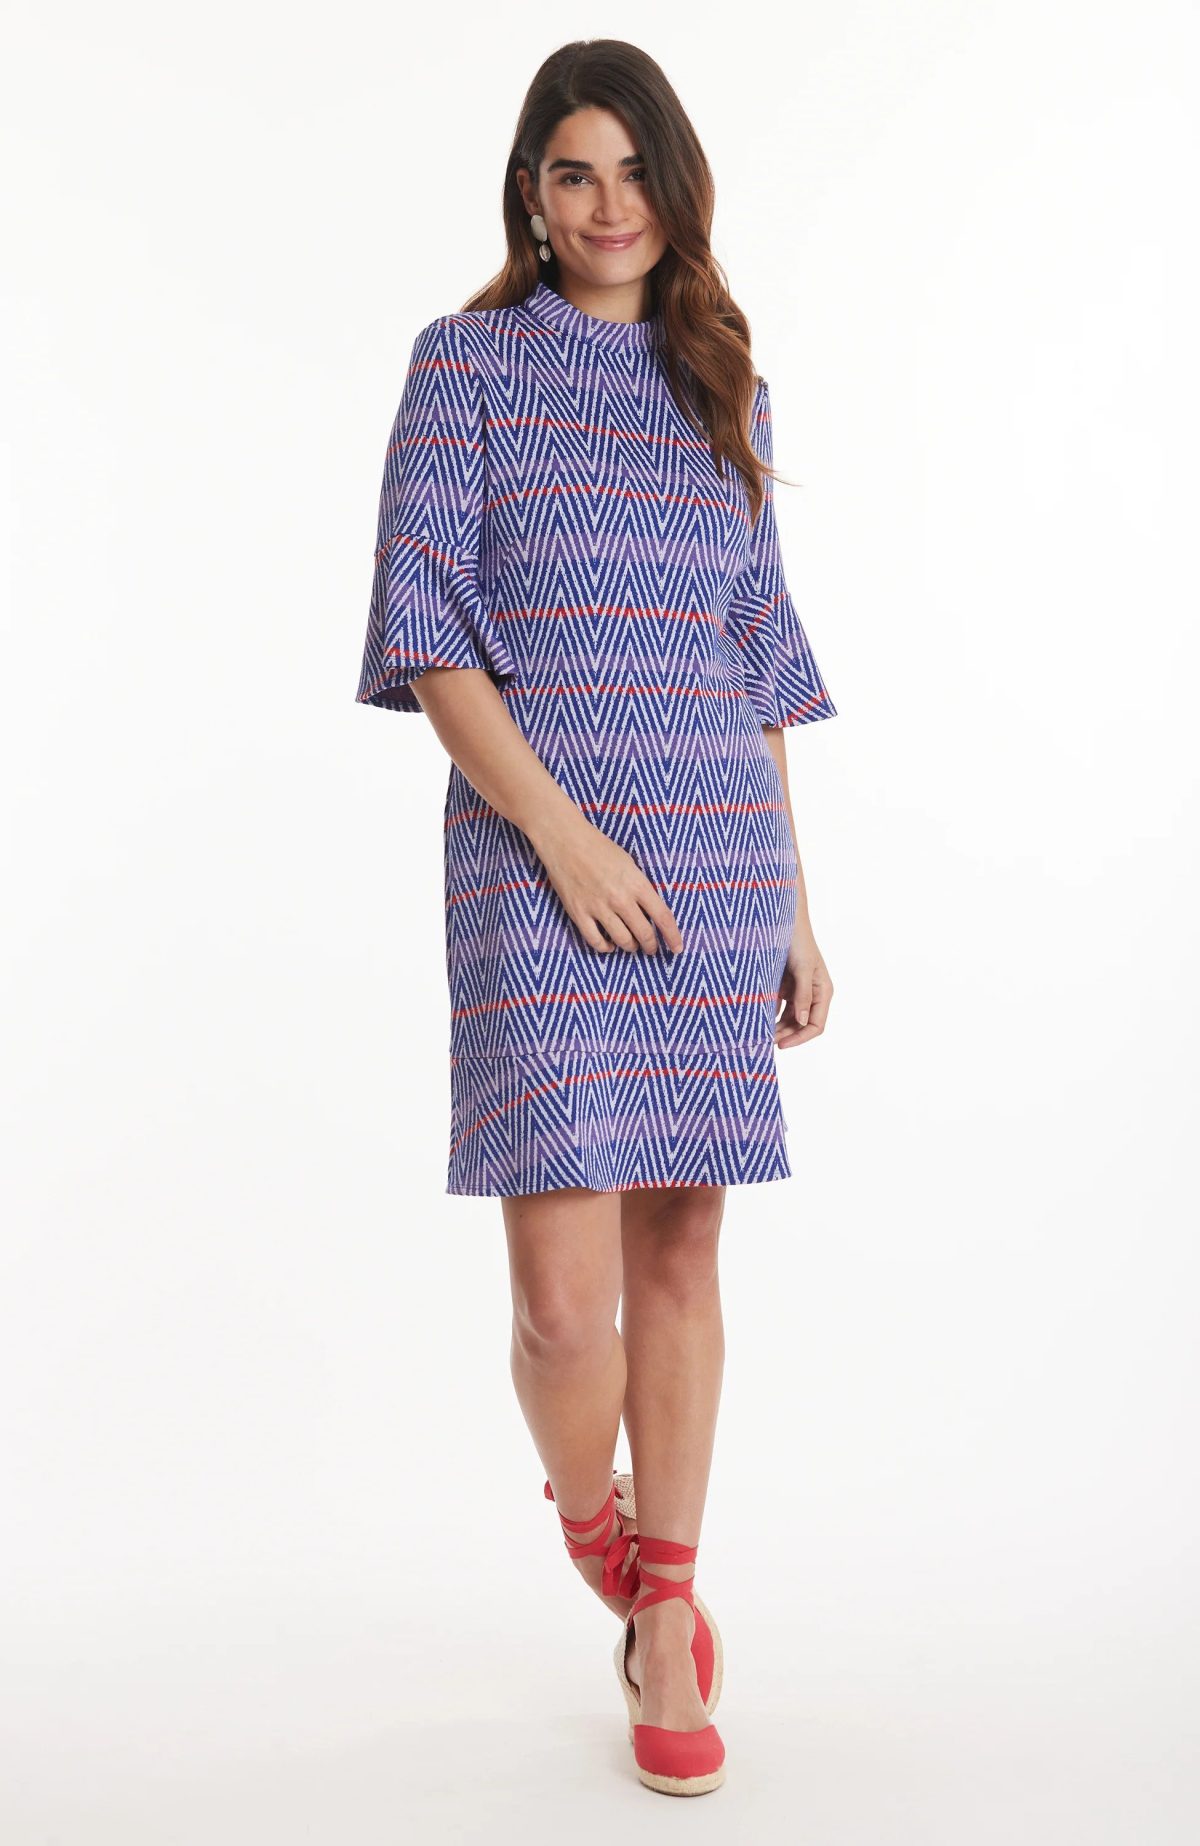 Tyler Boe 71208V CBC Chevron Mindy 3/4 Flared Sleeves Jacquard Dress | Ooh Ooh Shoes women's clothing and shoe boutique located in Naples and Mashpee